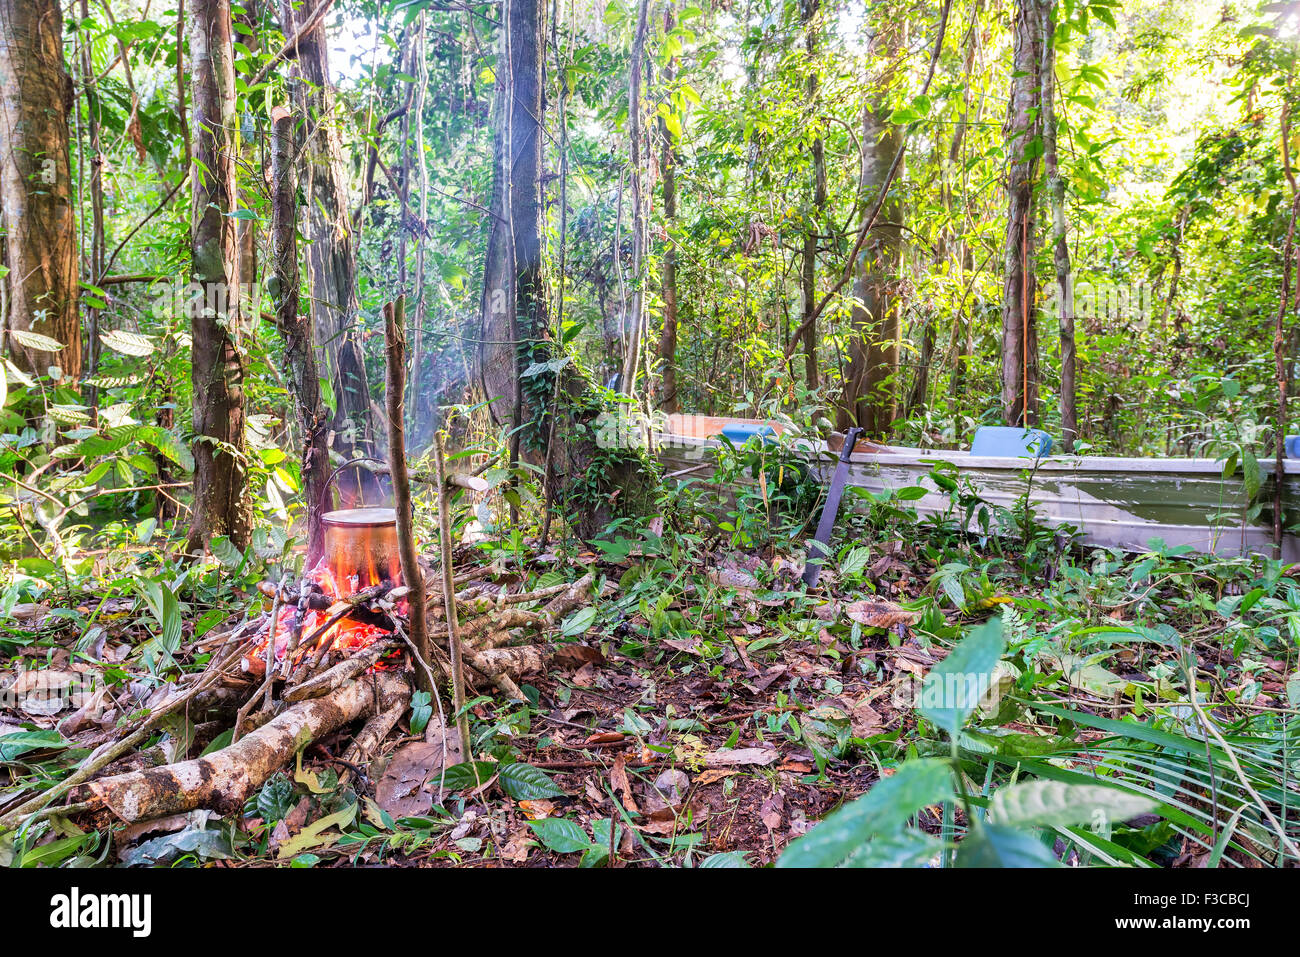 Campfire and boat in the Amazon rain forest near Iquitos, Peru Stock Photo